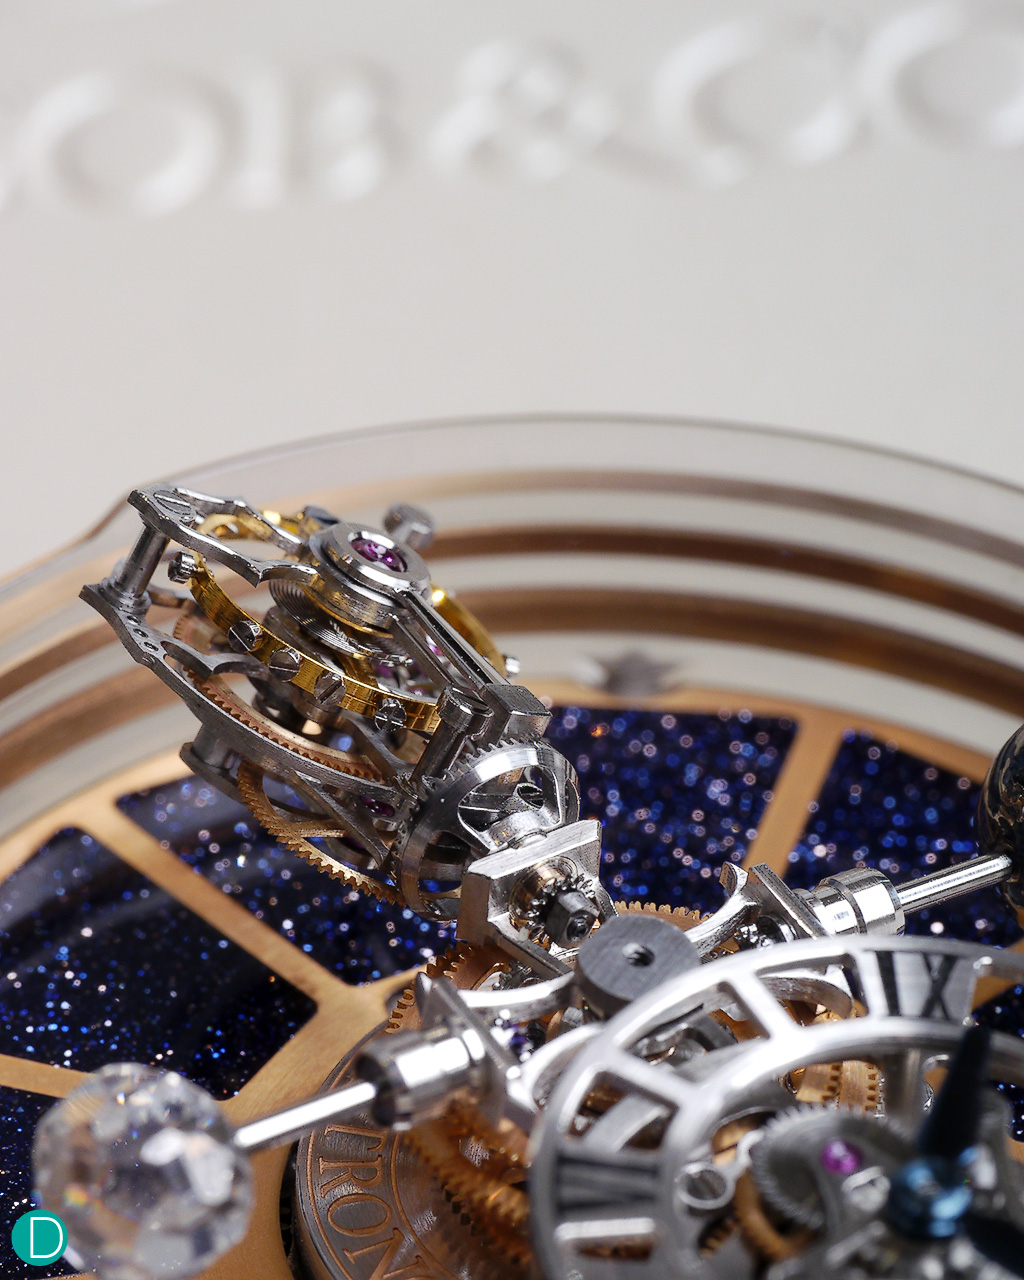 Another micro shot of the tourbillon. Notice that this is actually a triple-axis tourbillon.